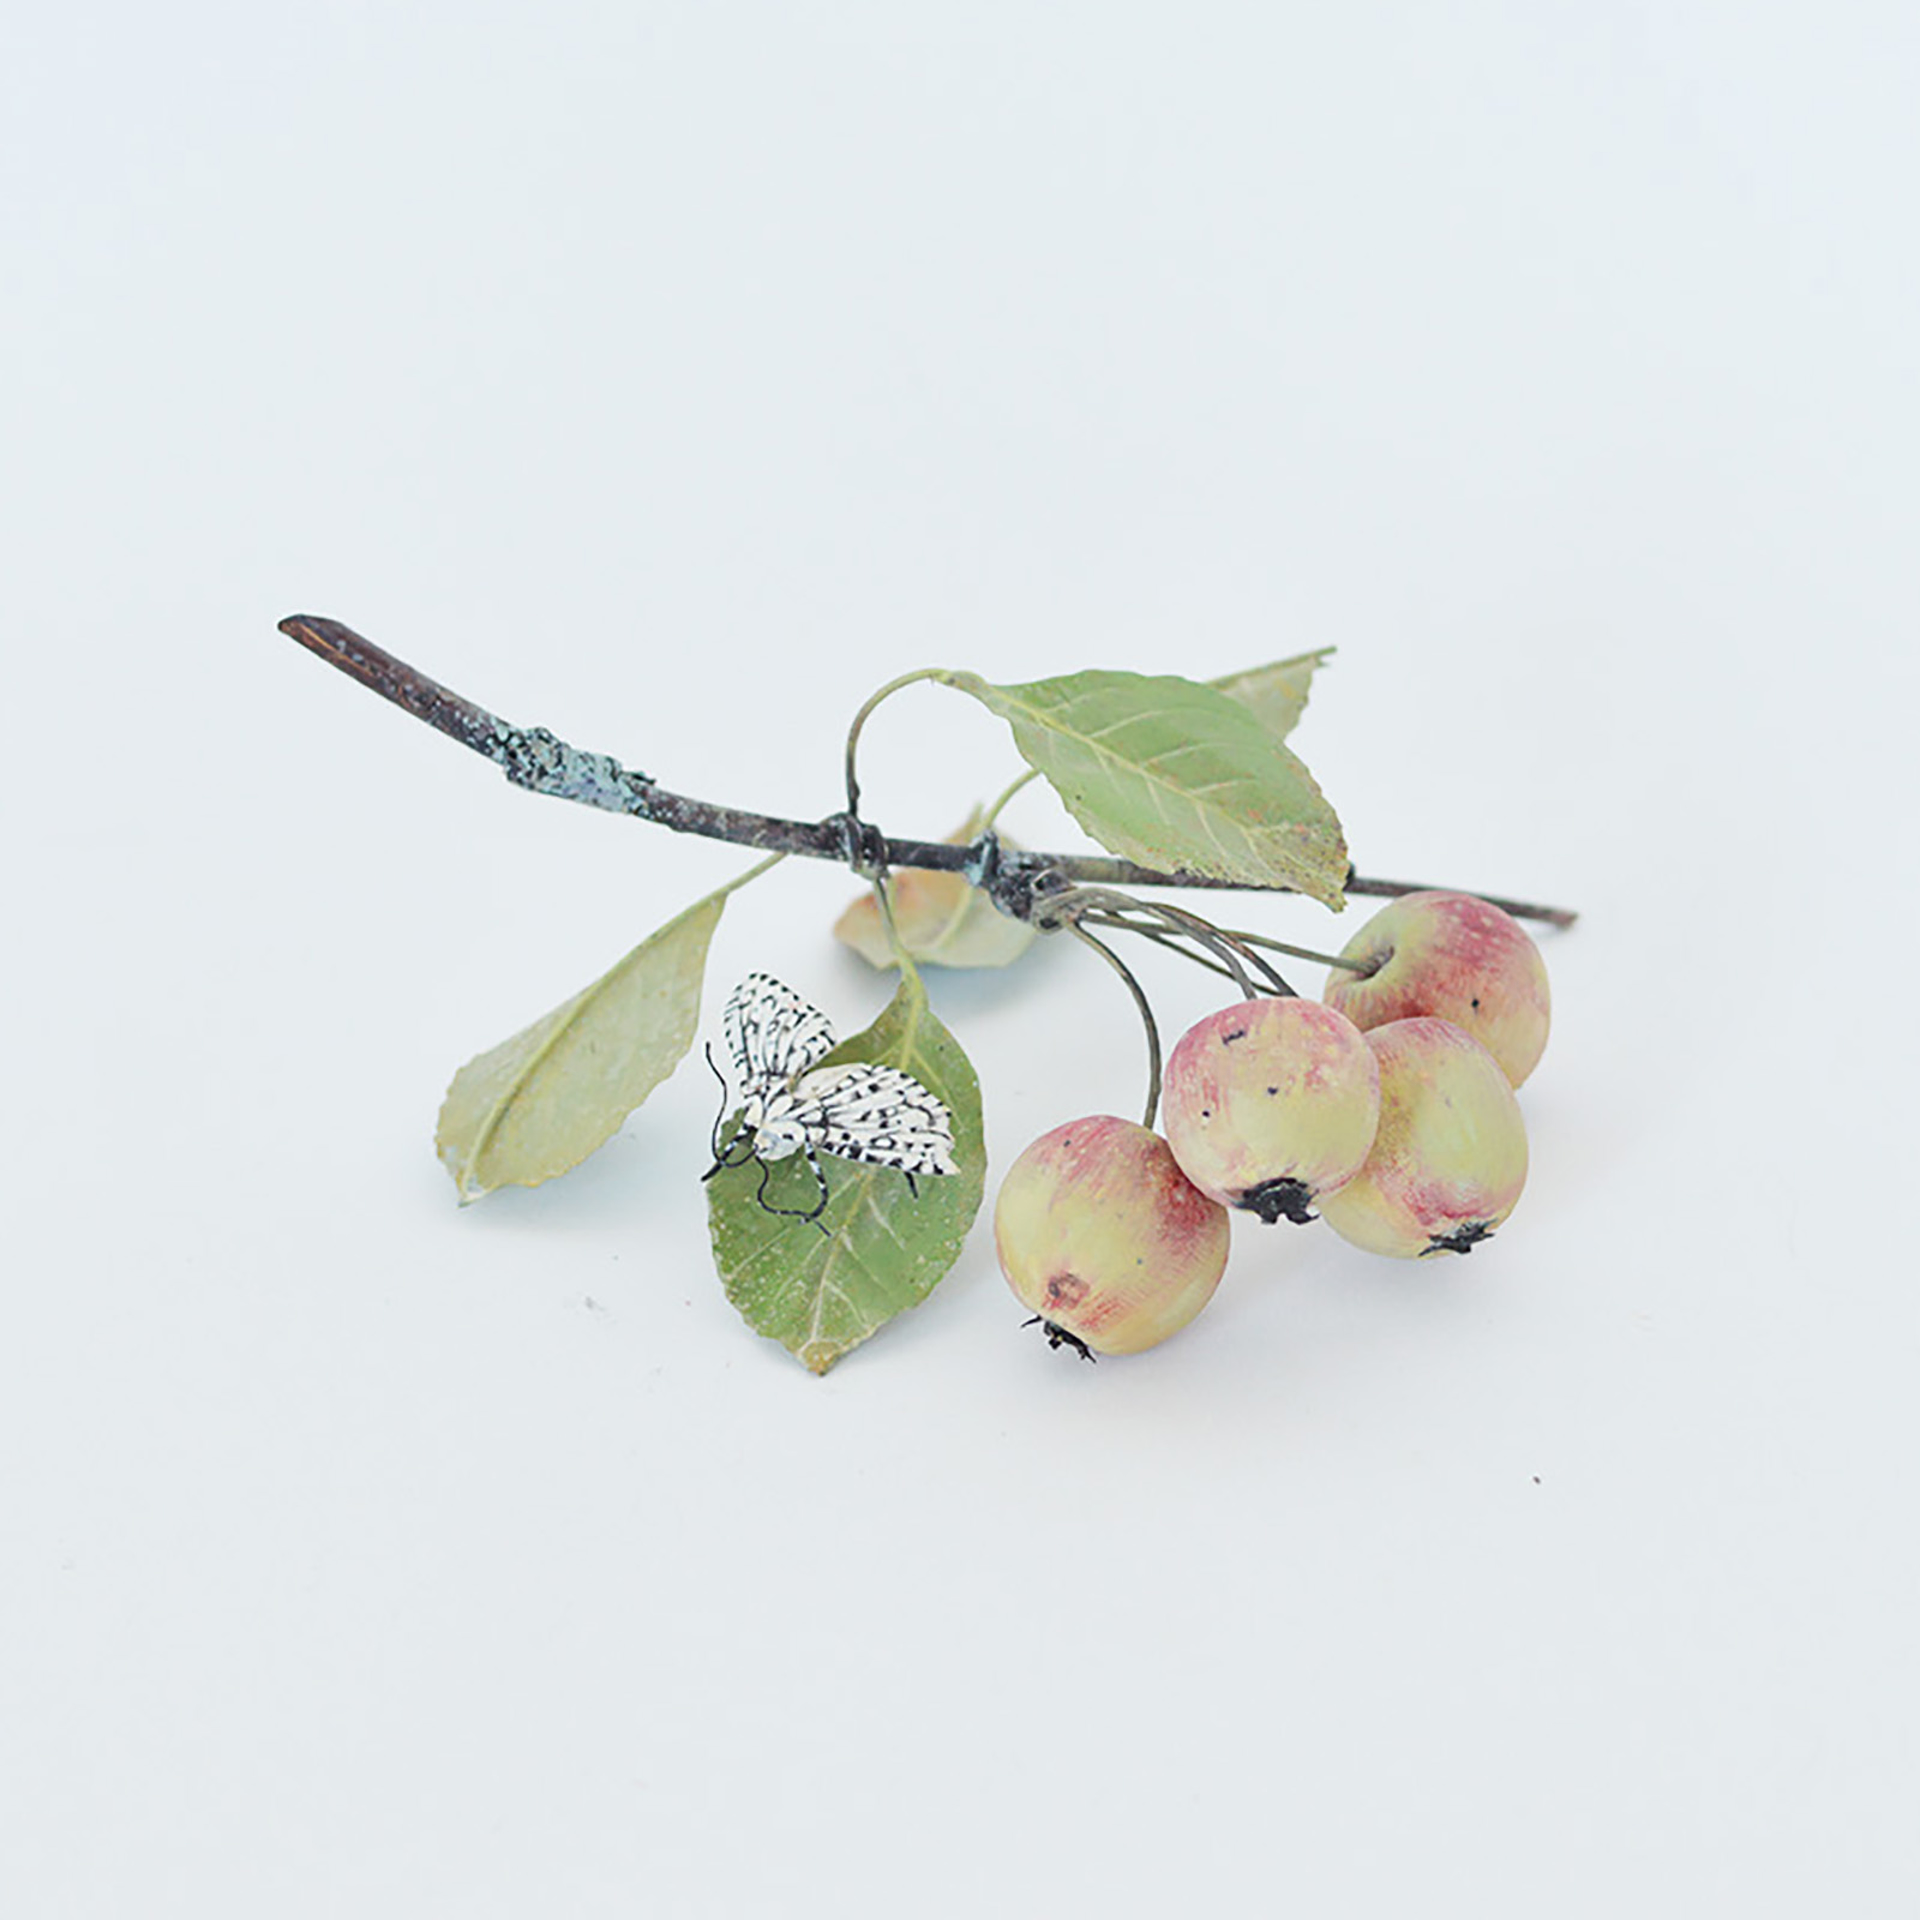 CRABAPPLE BRANCH WITH LEOPARD MOTH by Carmen Almon